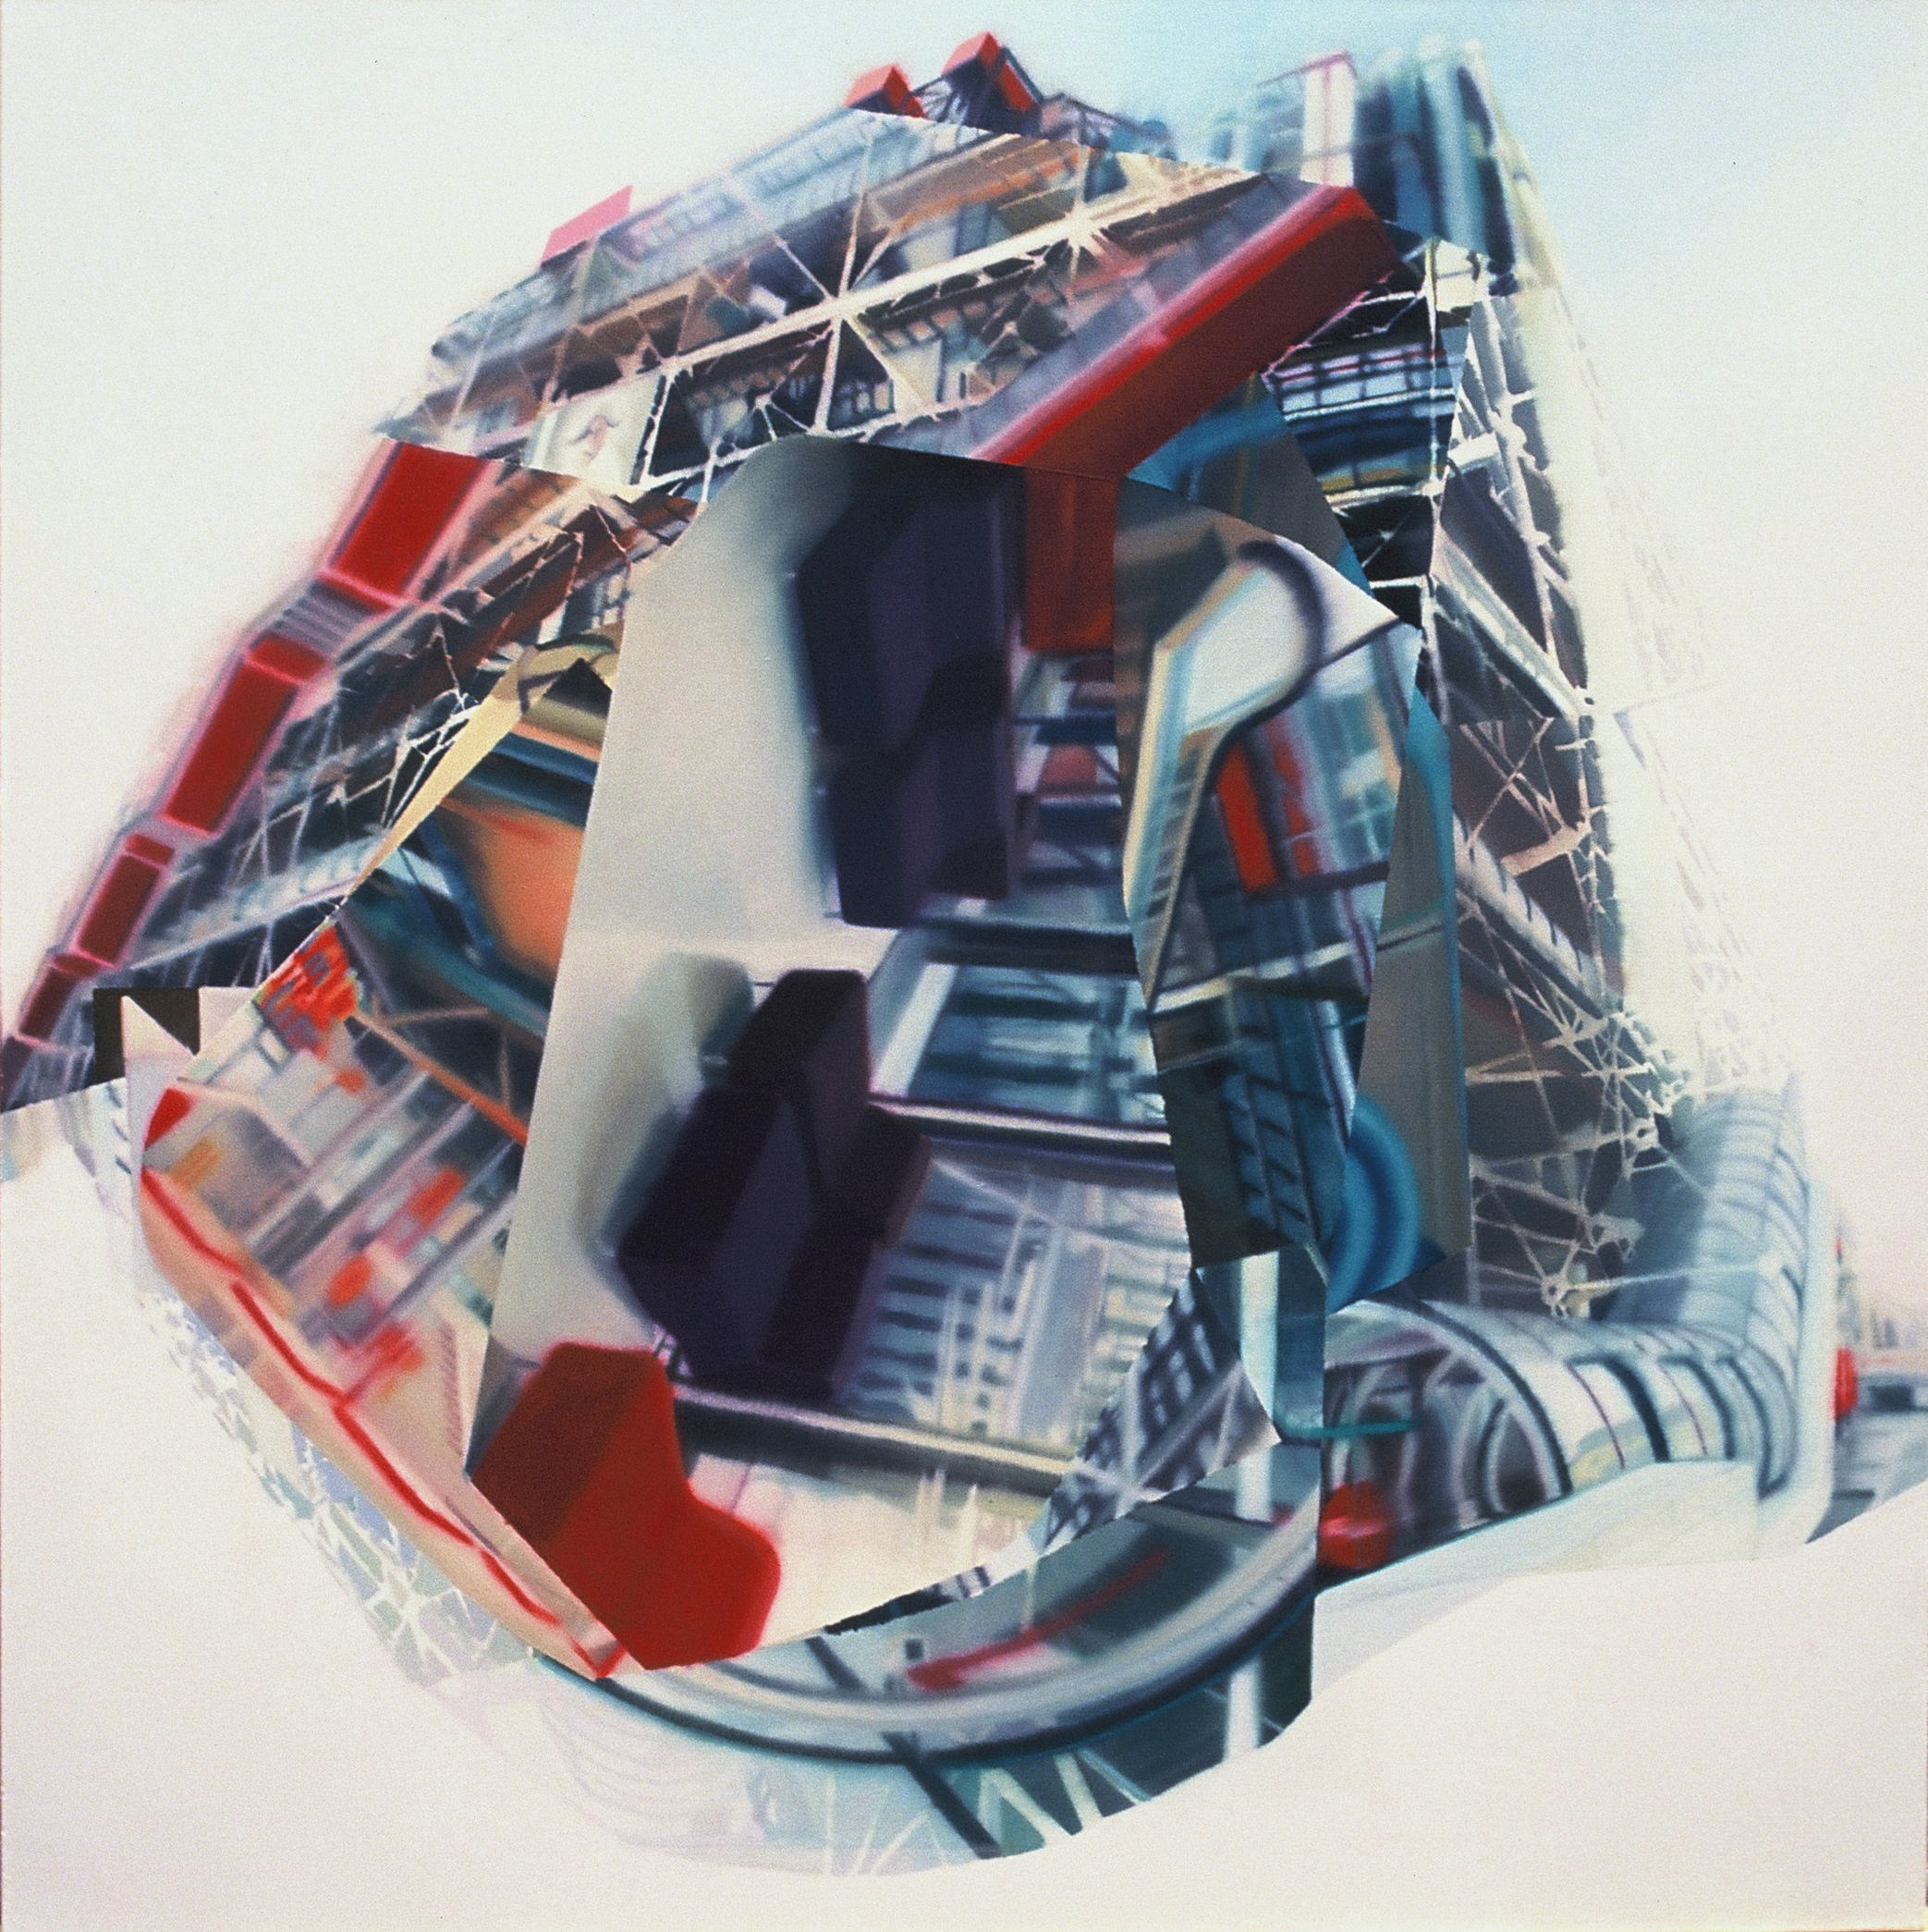   Untitled (ring) , 2002, oil on canvas, 150 x 150cm. Private Collection, France    